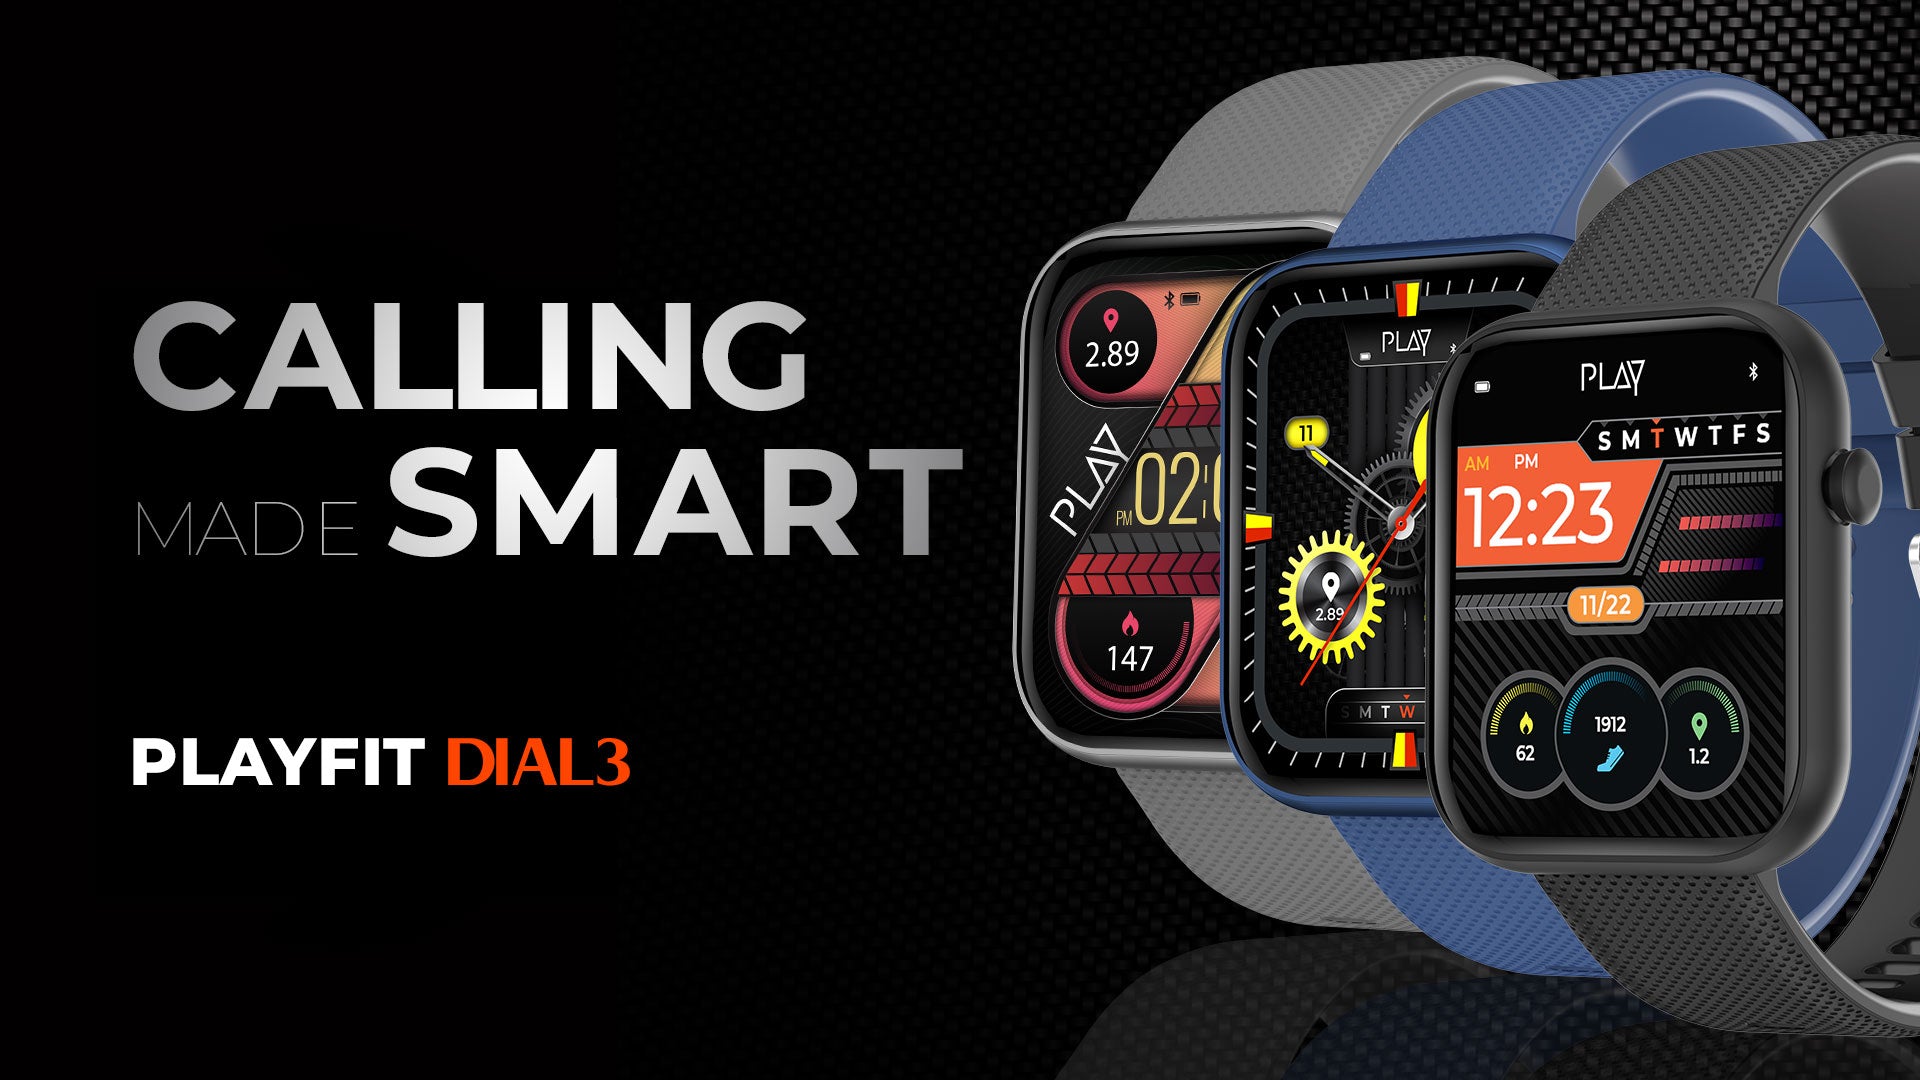 PLAY DIAL 3 Full Touch Smart Watch